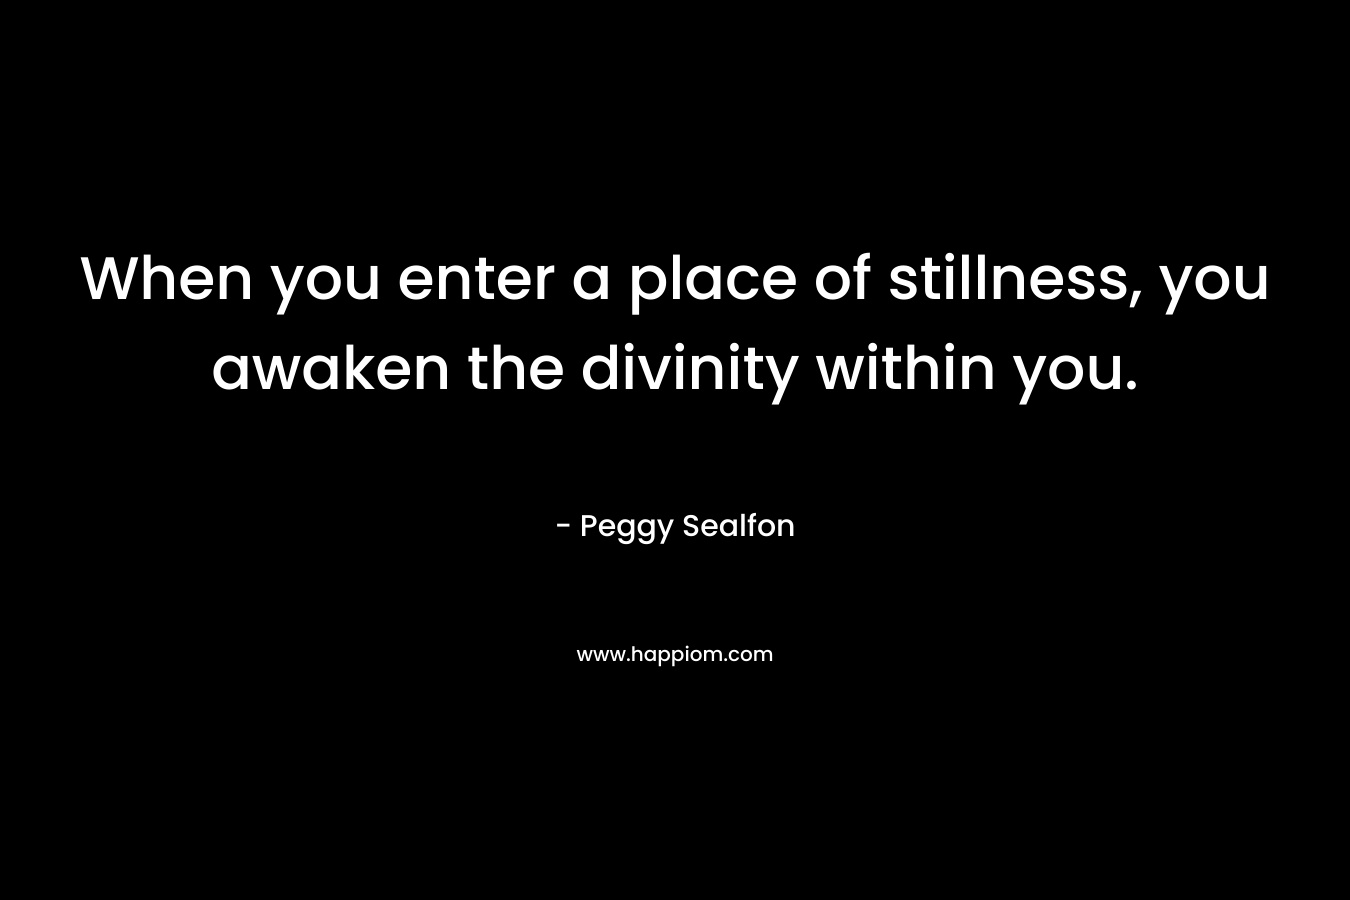 When you enter a place of stillness, you awaken the divinity within you.